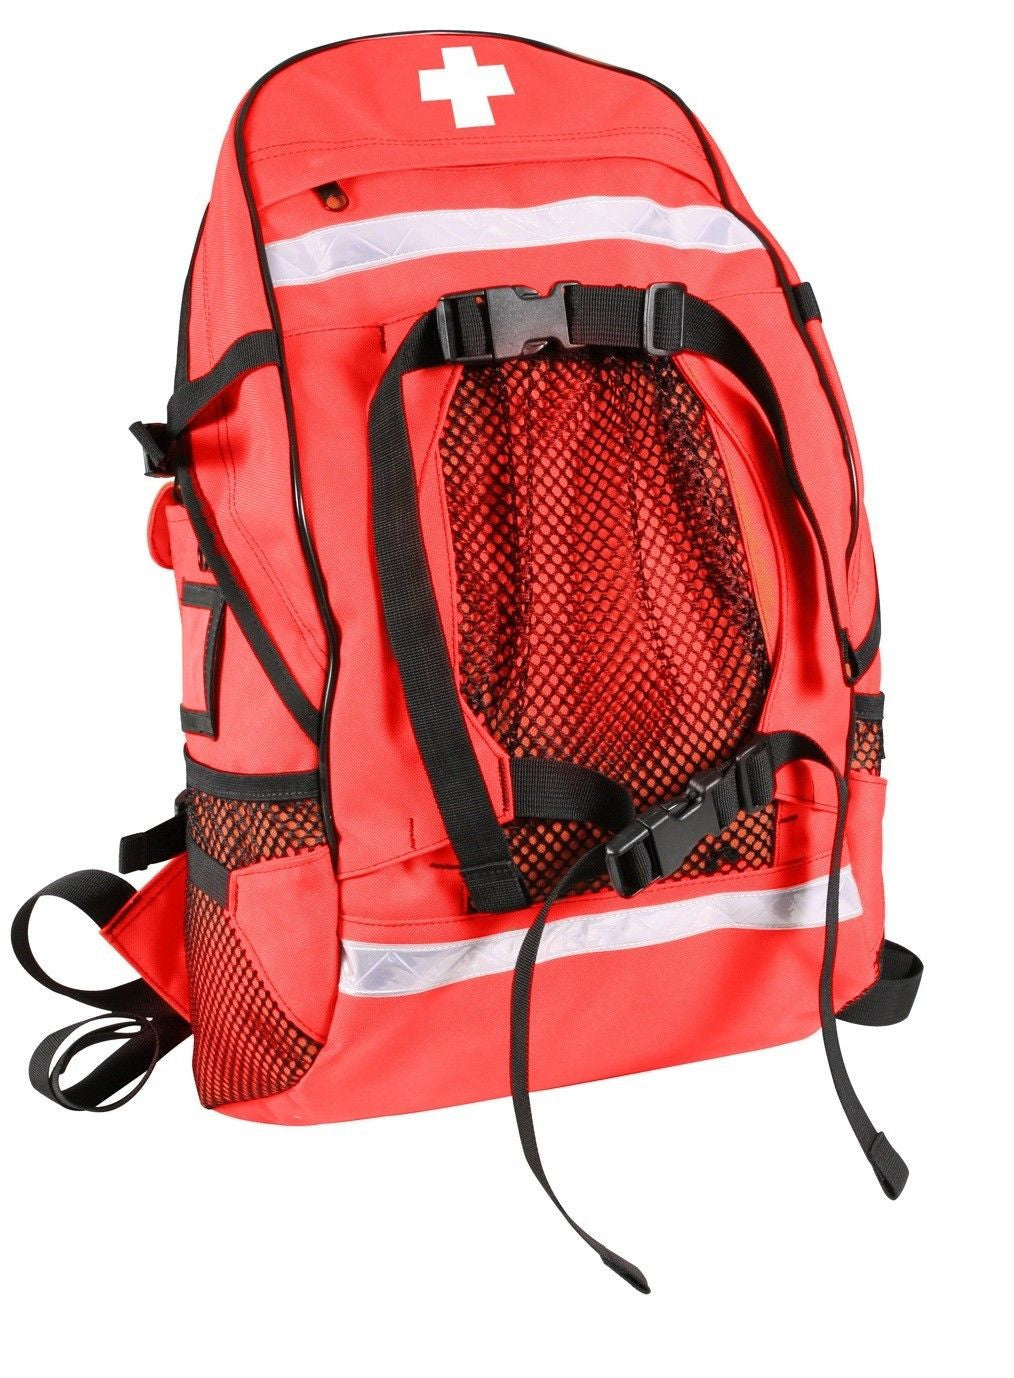 What is in a red ambulance bag